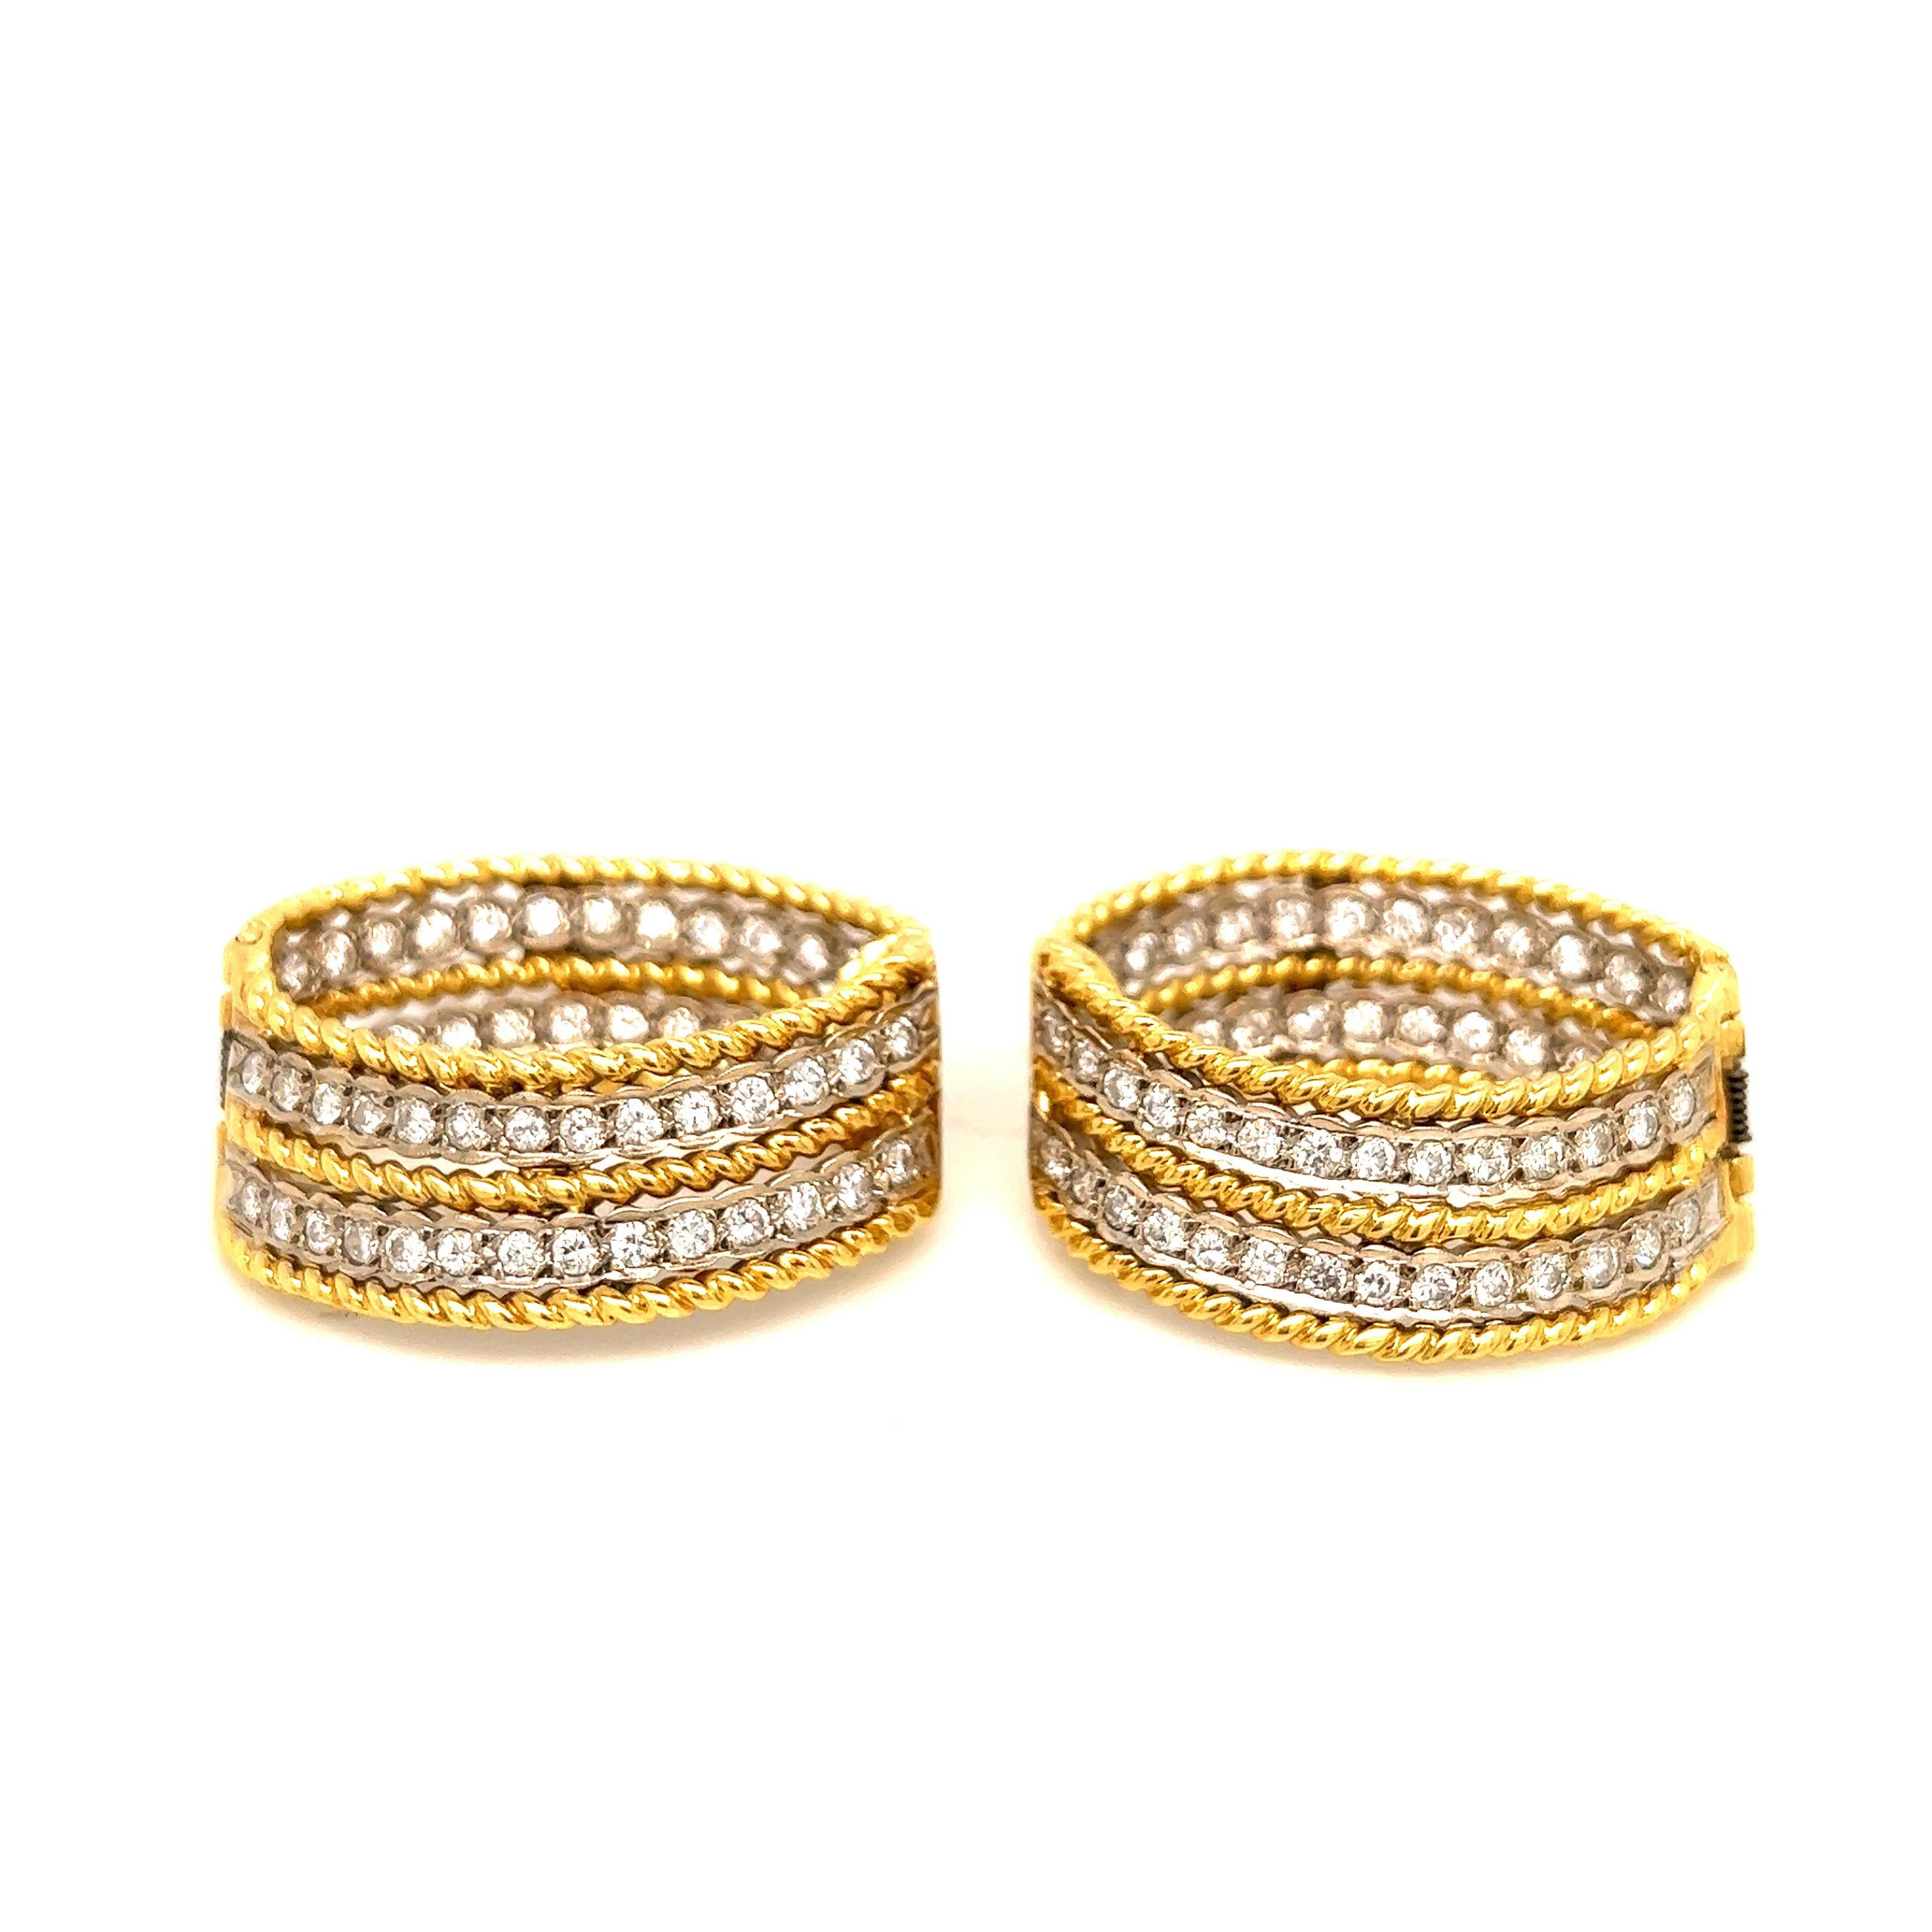 Gold and diamond earrings

Hinged hoops set with full-cut diamonds of approximately 3.5 carats, 18 karat yellow gold; marked 18k

Size: width 1 inch, length 1.19 inch
Total weight: 25.2 grams